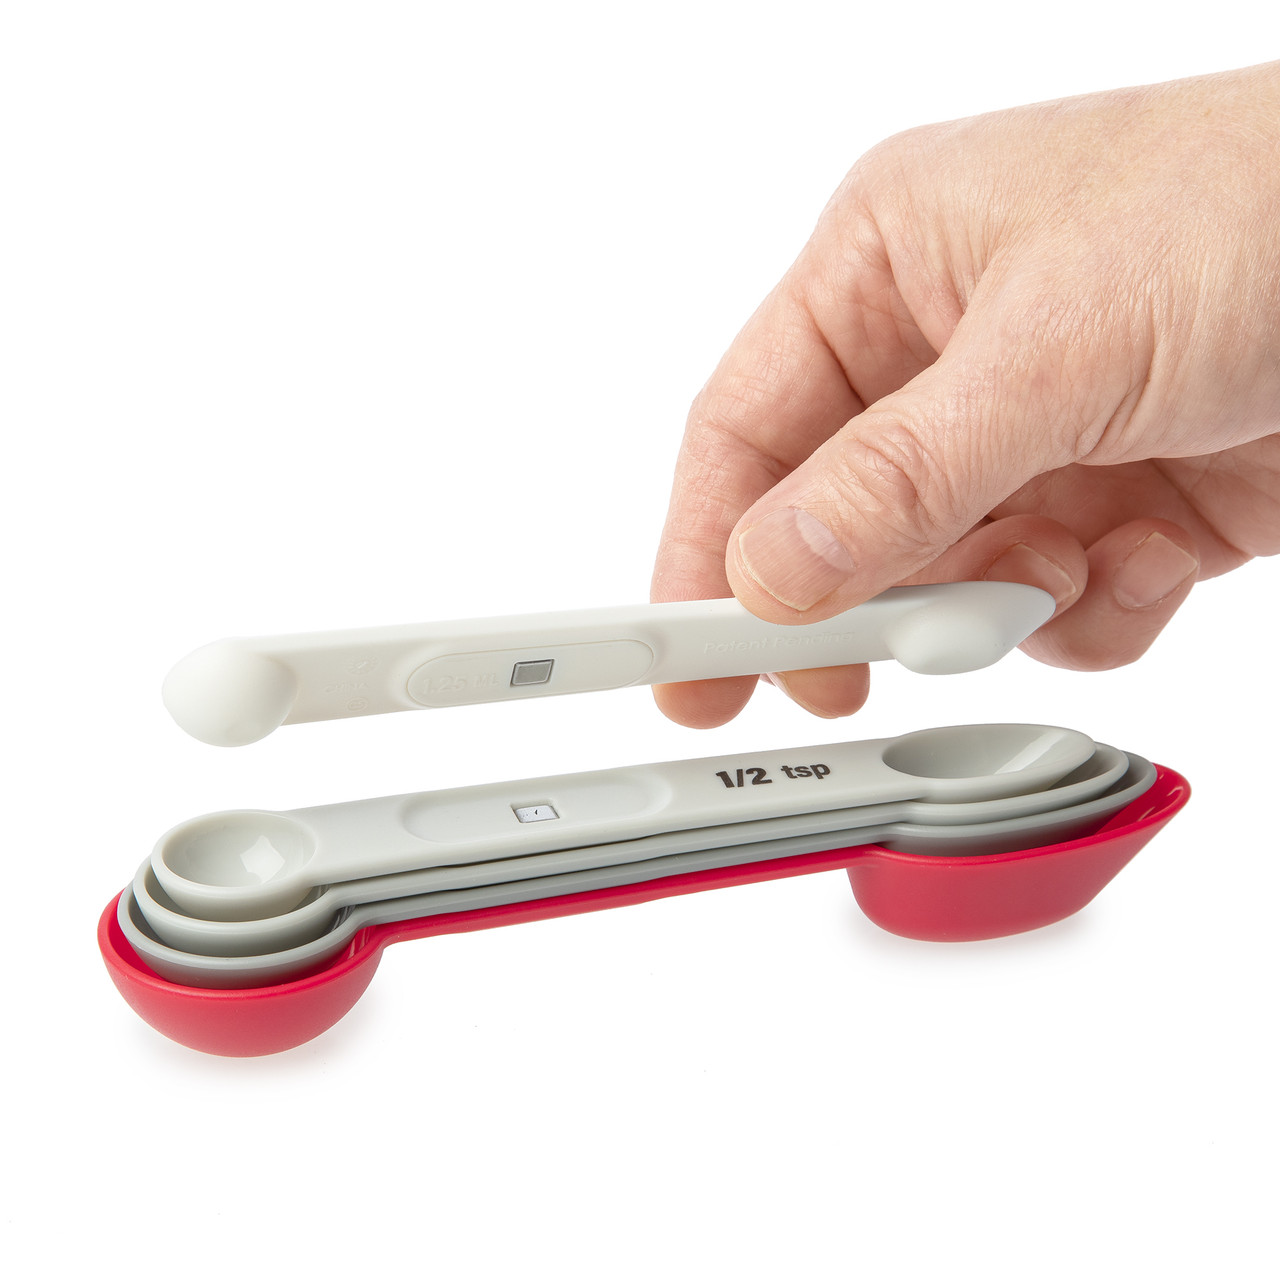 These Magnetic Measuring Spoons Are 32% Off During 's Prime